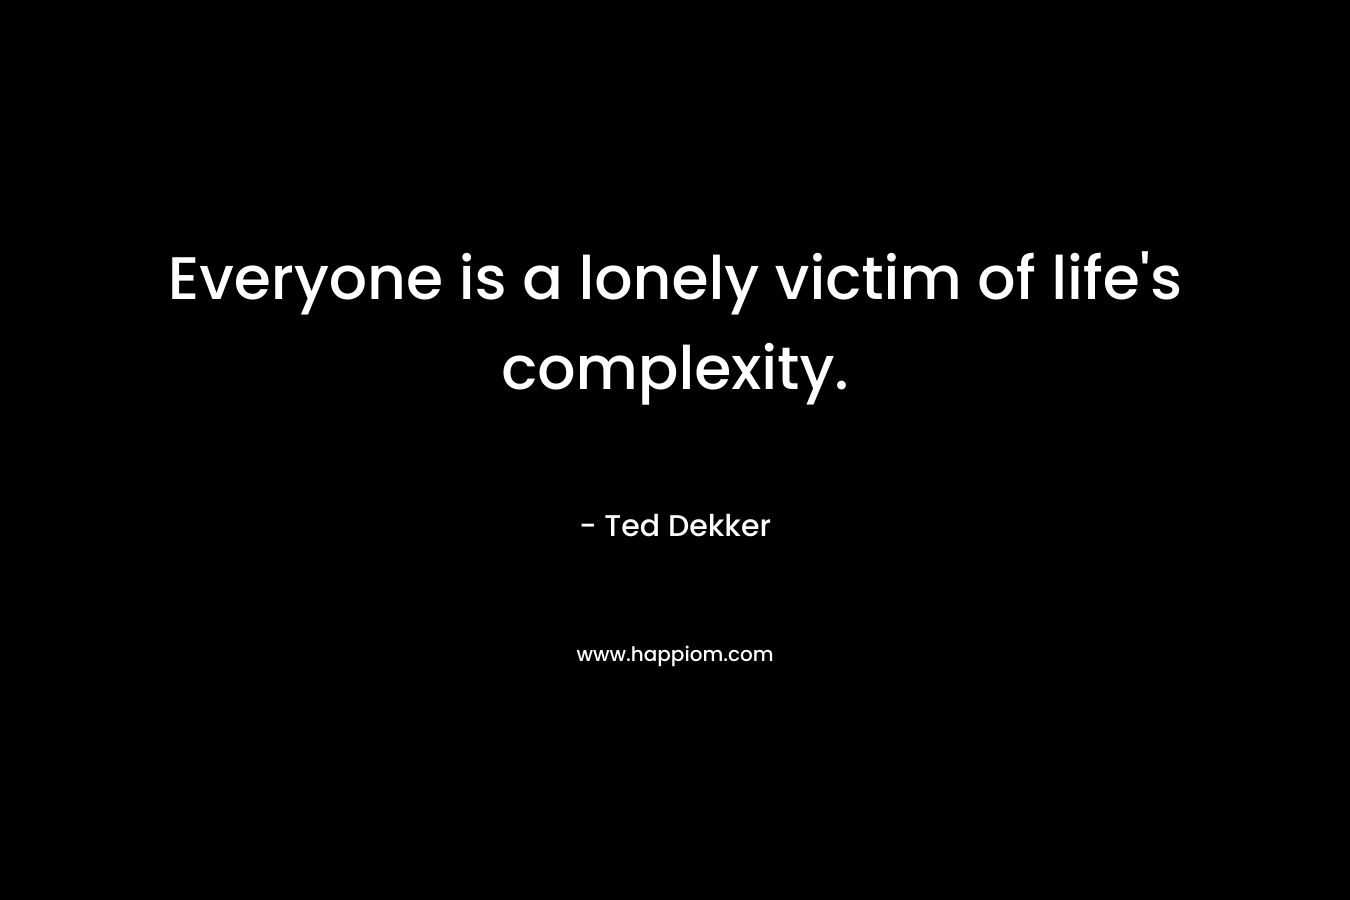 Everyone is a lonely victim of life's complexity.